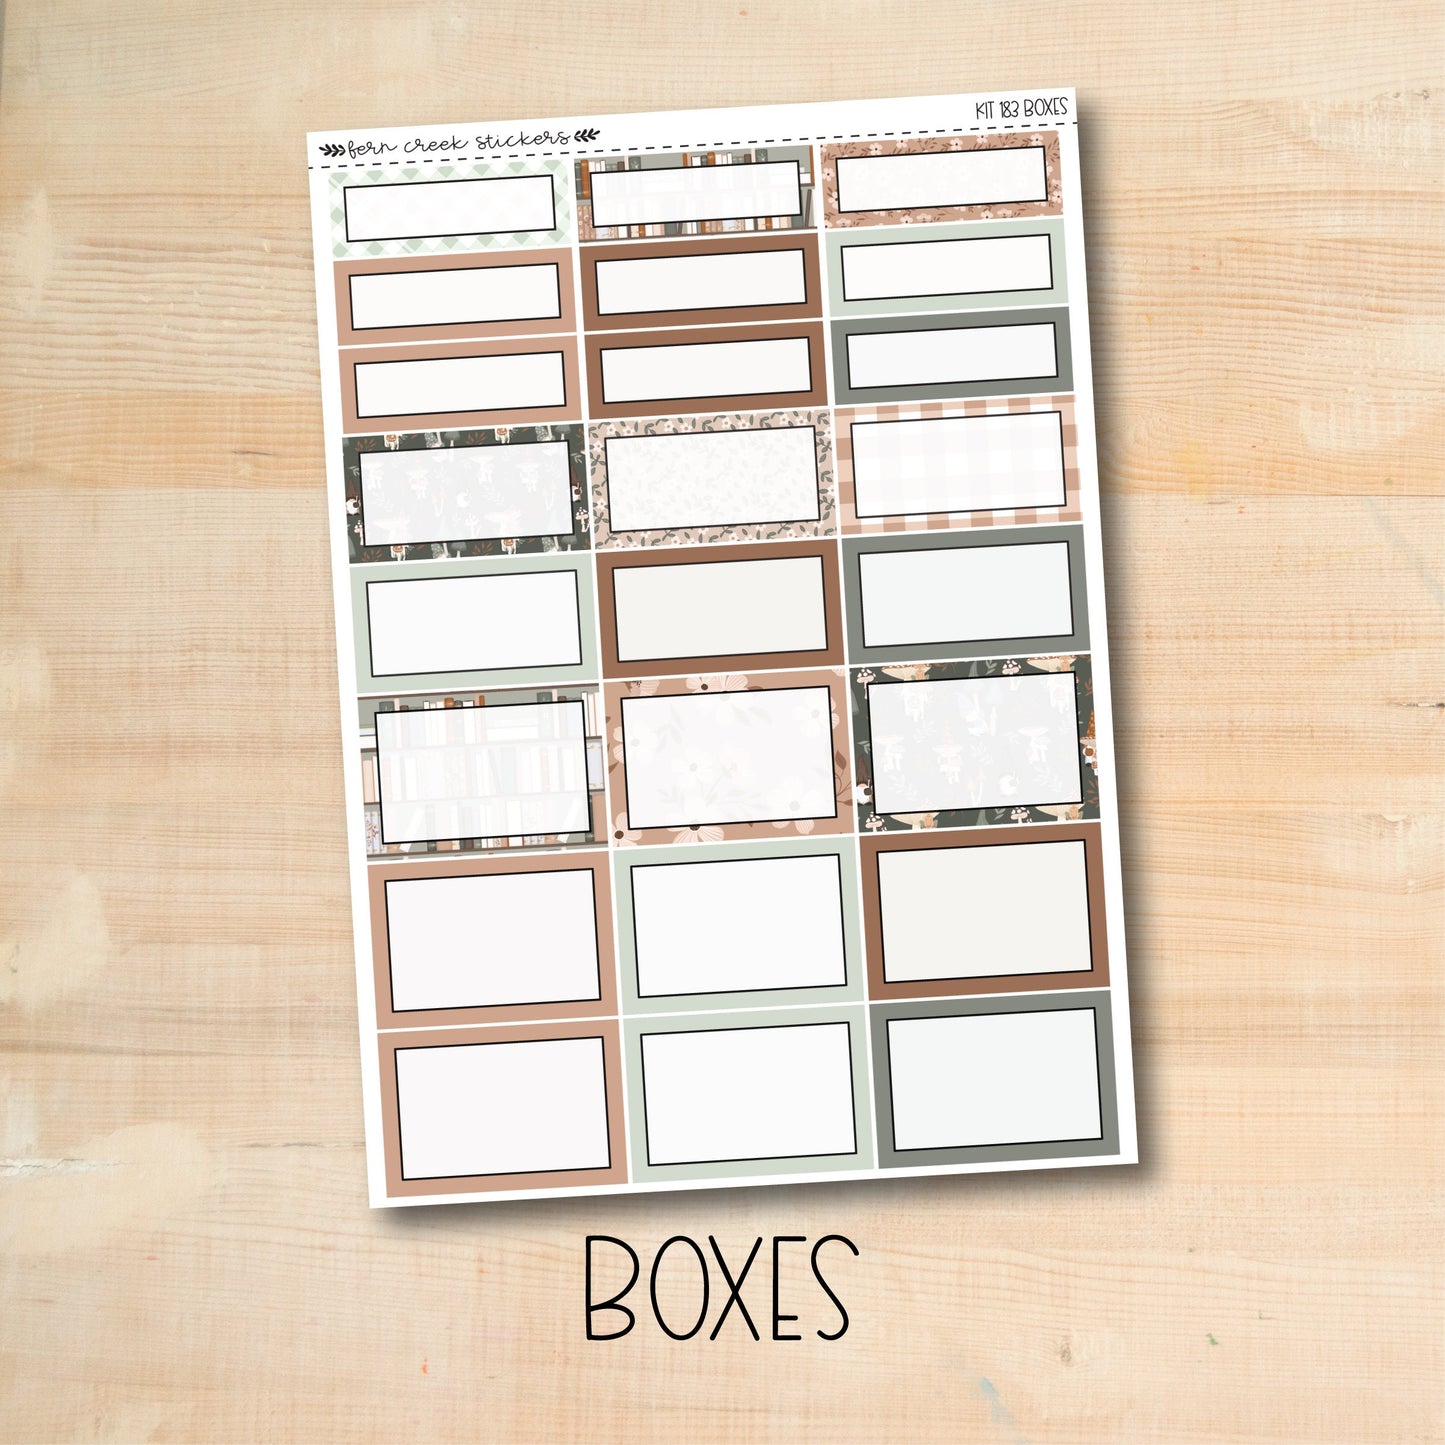 KIT-183 || FALL COTTAGE weekly planner kit for Erin Condren, Plum Paper, MakseLife and more!